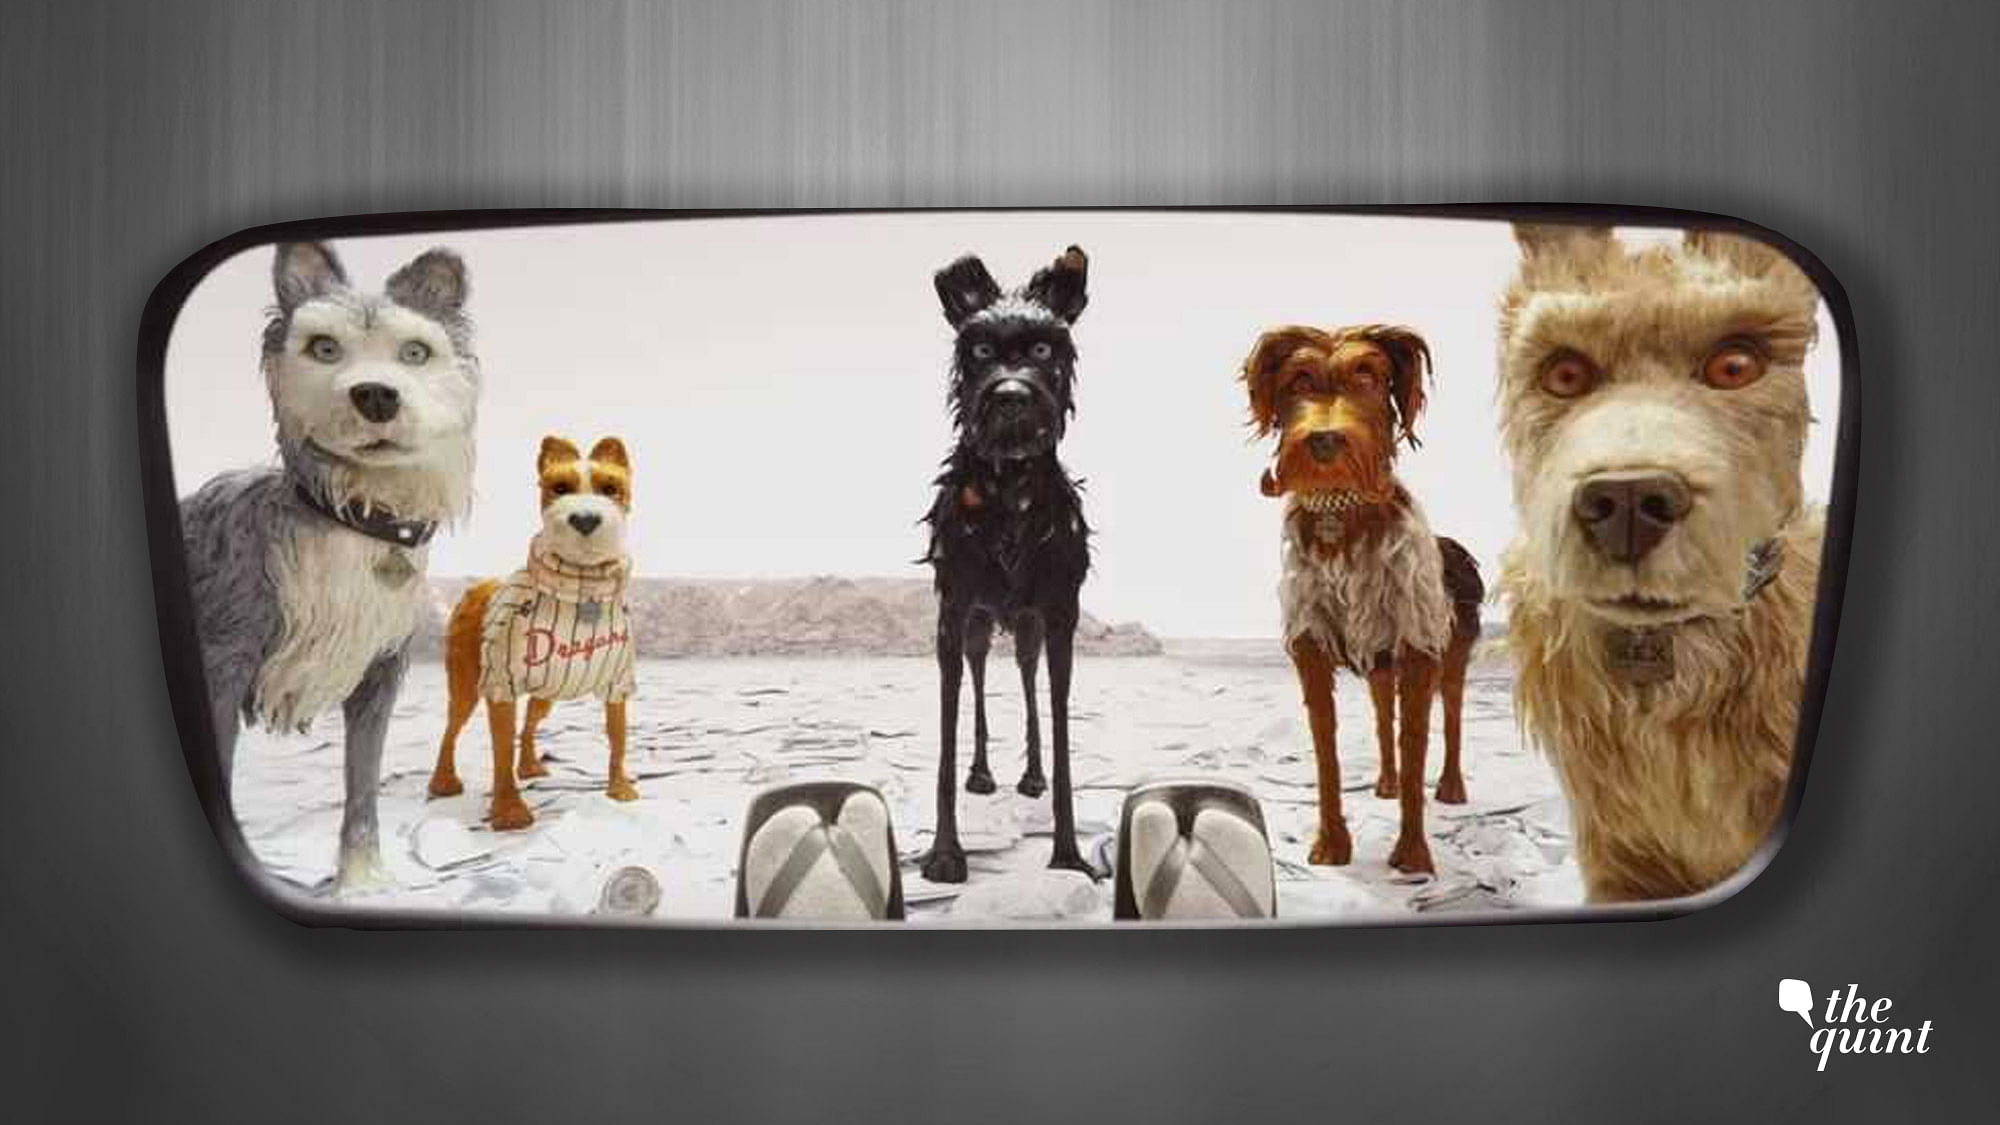 A still from <i>Isle of Dogs</i>.